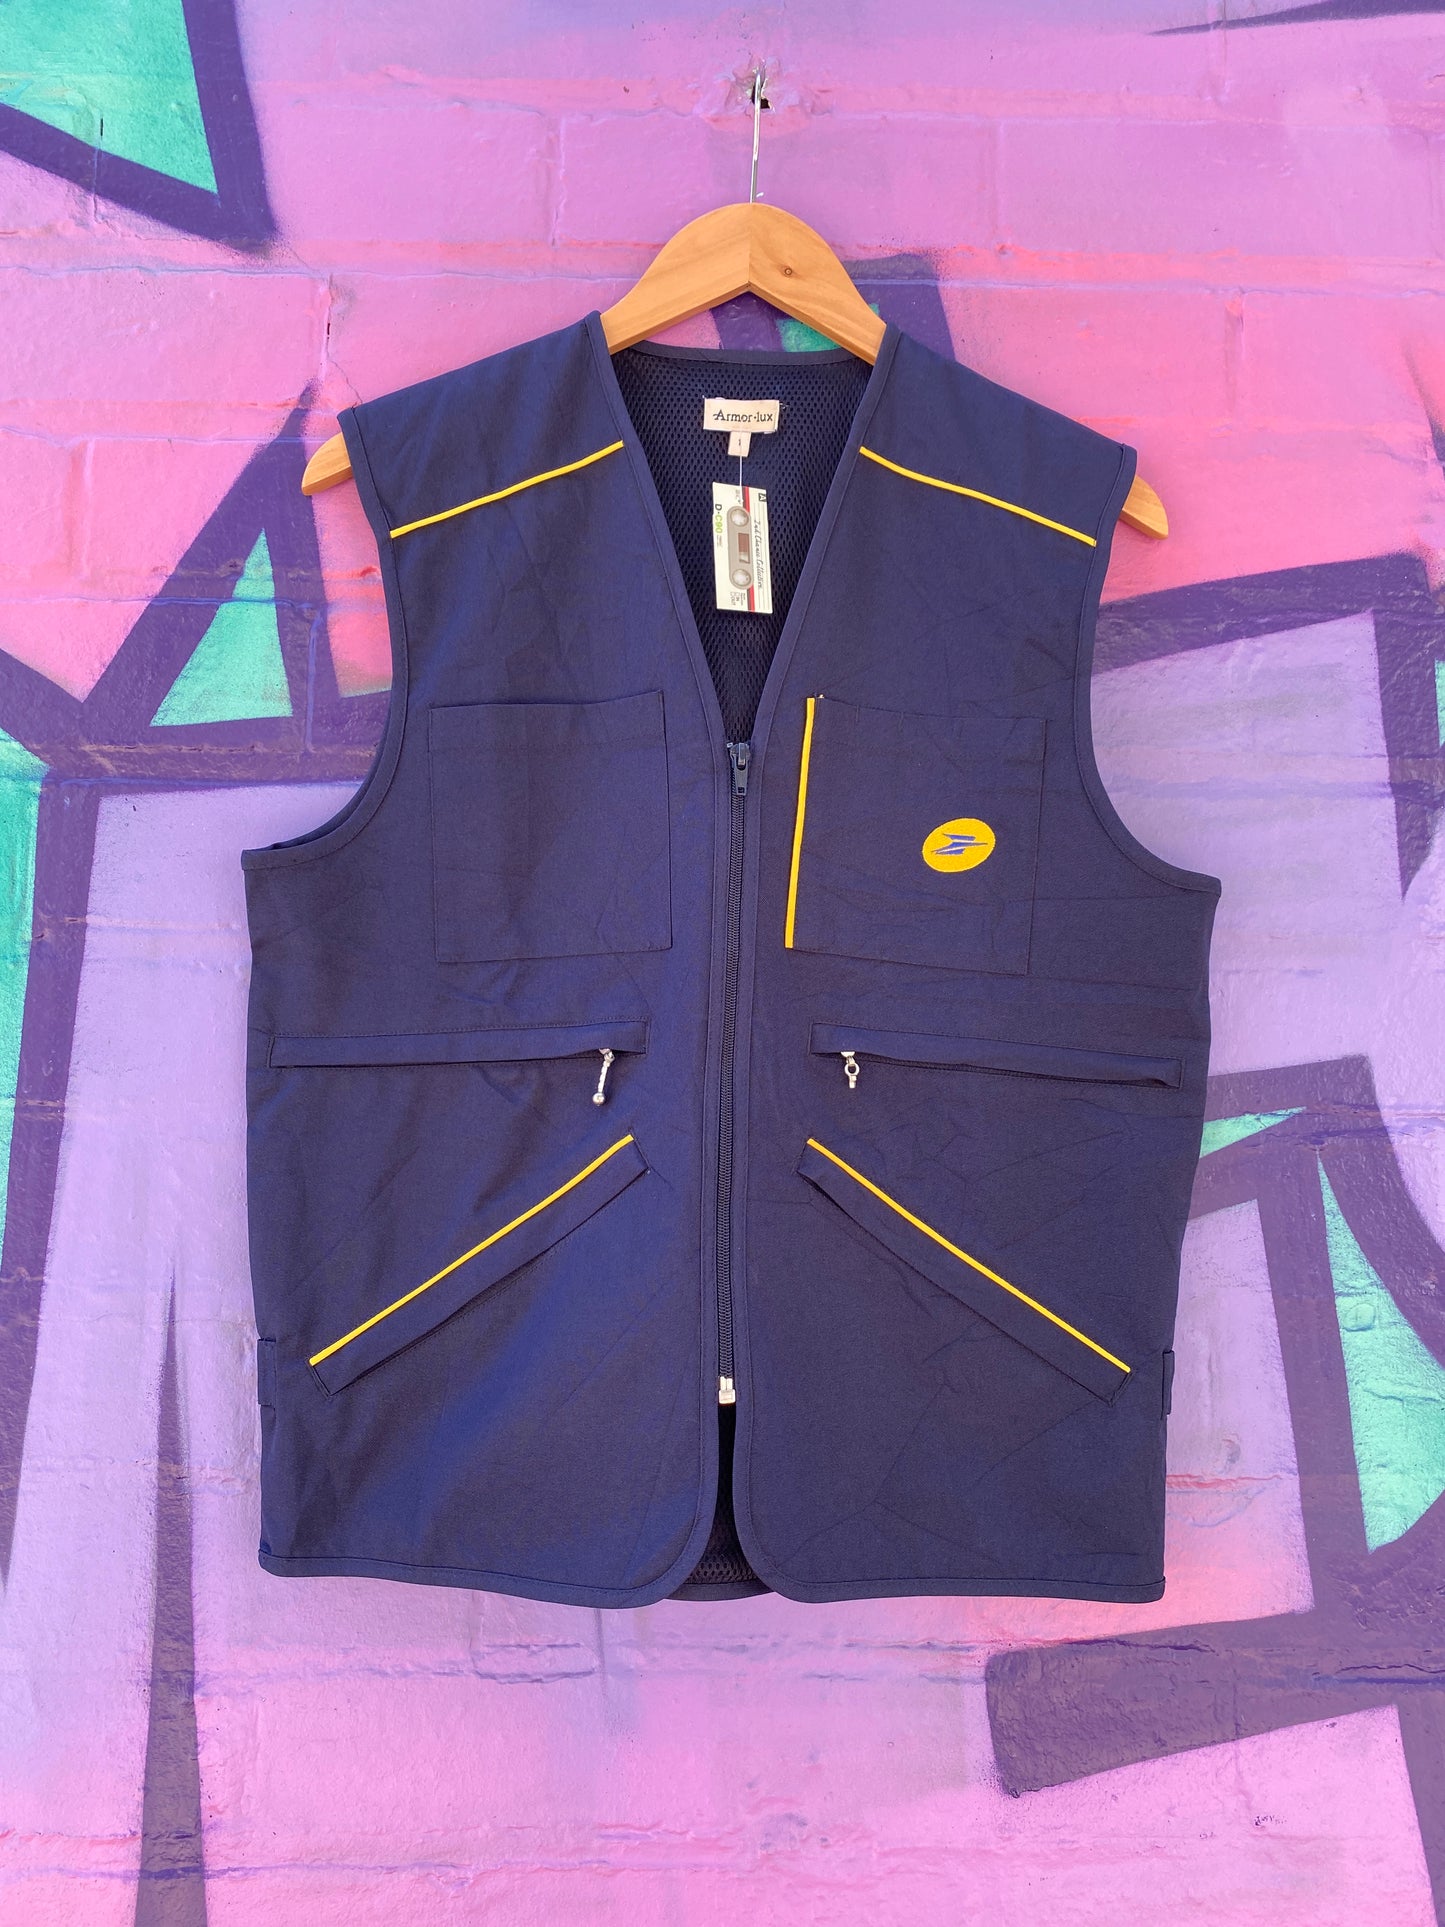 L - Armor-lux Navy/Yellow Accents Work Vest